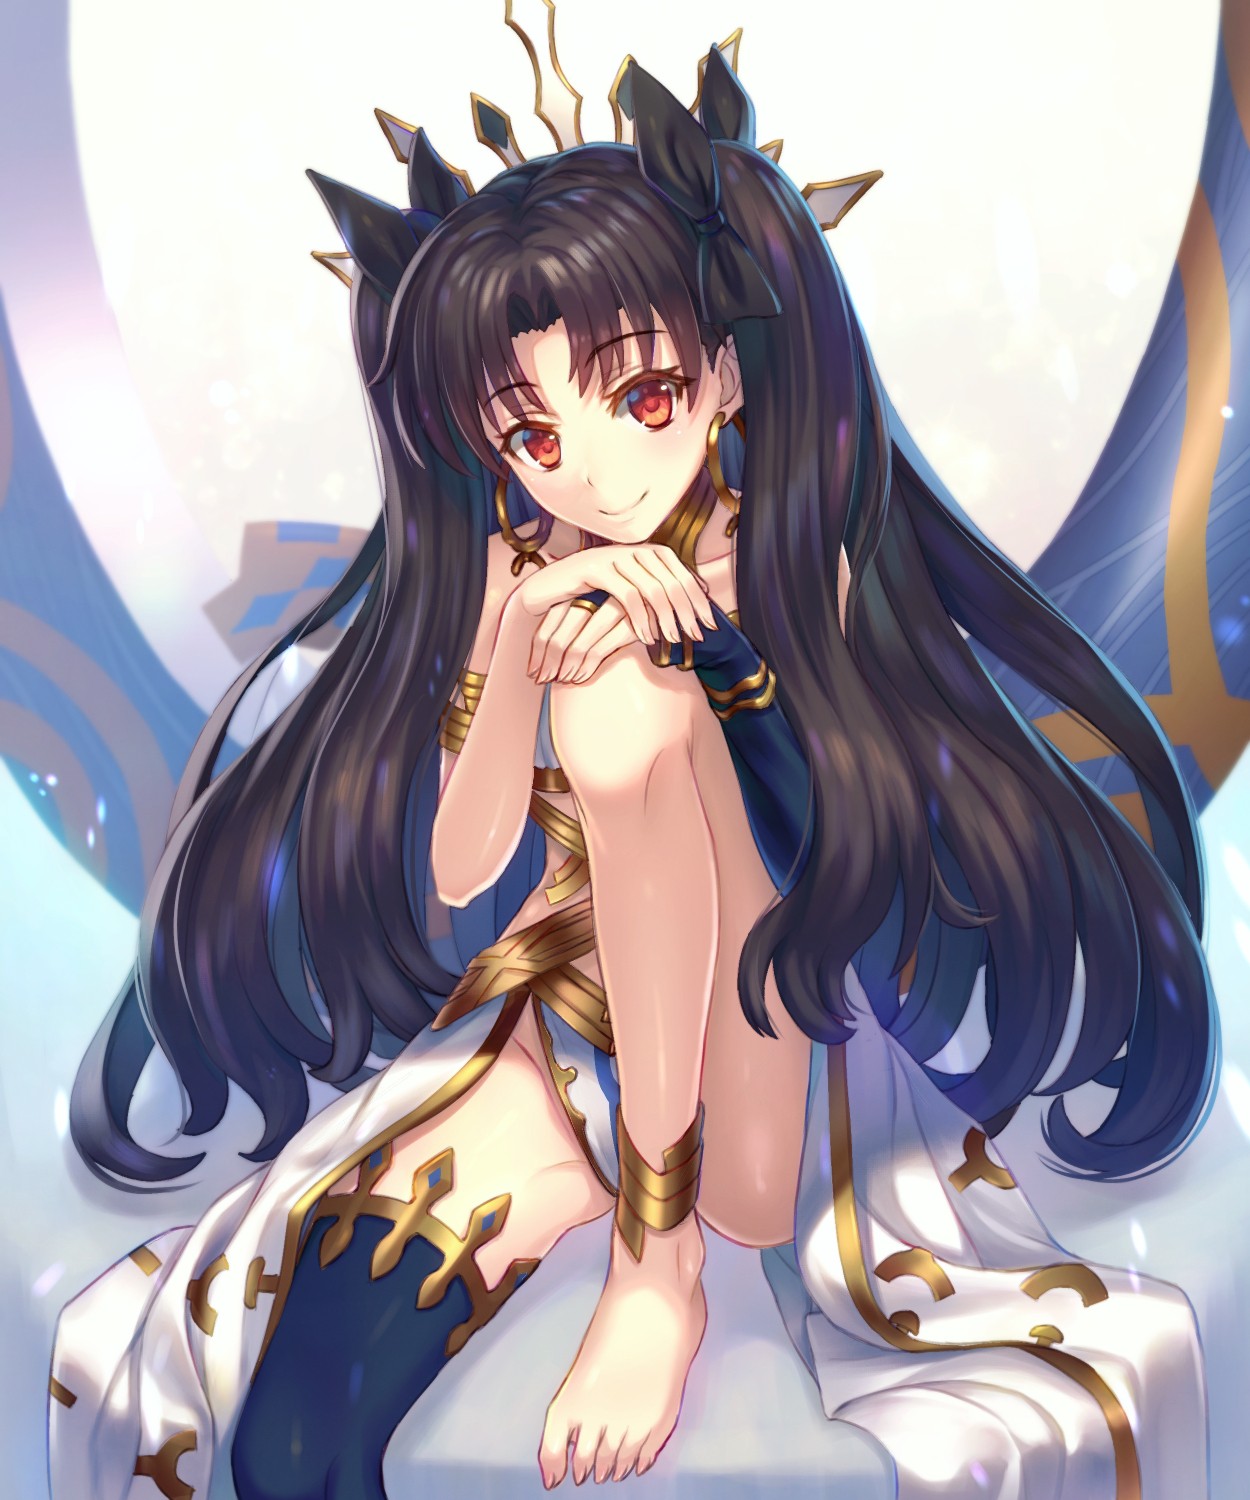 Anime 1250x1500 Fate/Grand Order armor cleavage thigh-highs feet white background simple background anime girls anime Ishtar (Fate/Grand Order) missing sock Fate series